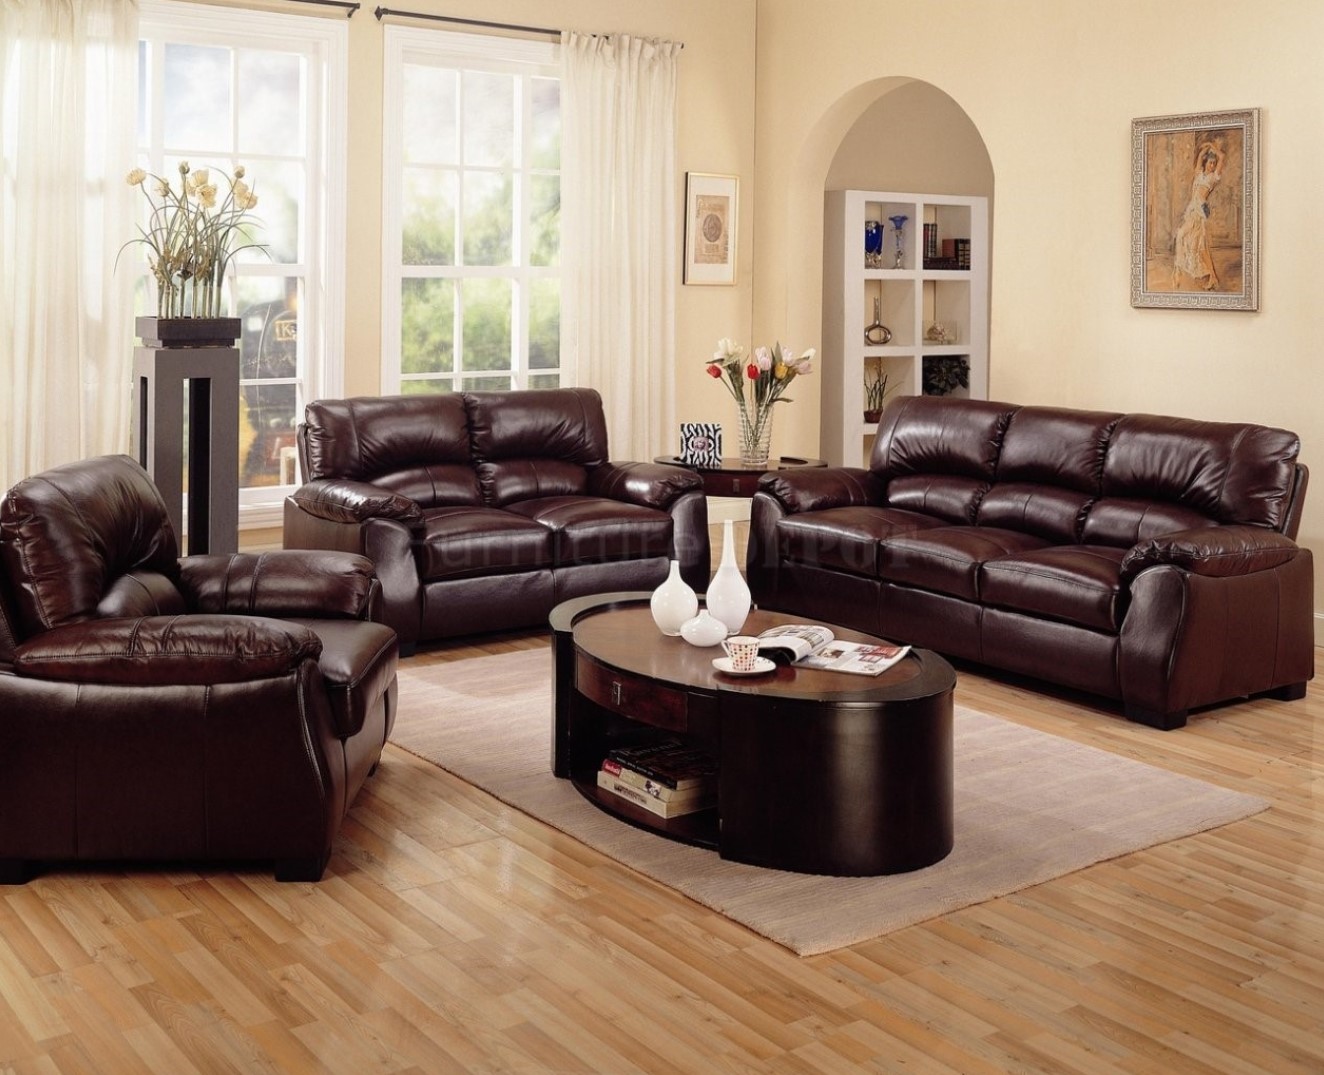 living room ideas with brown couch